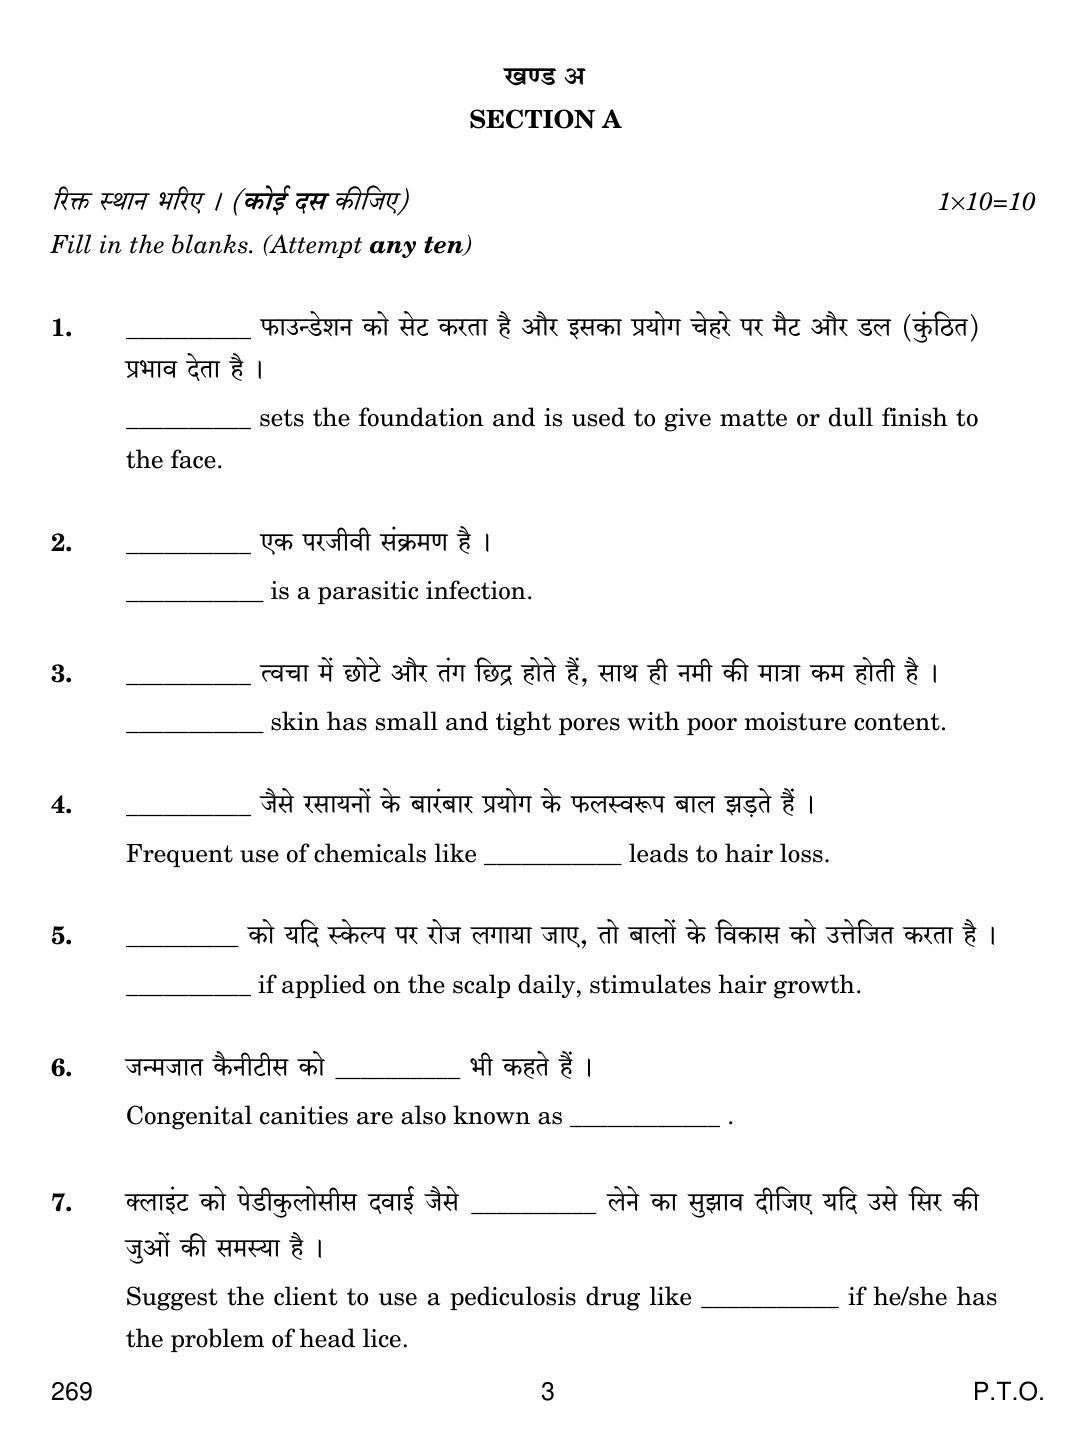 CBSE Class 12 269 BEAUTY AND HAIR 2019 Compartment Question Paper - Page 3